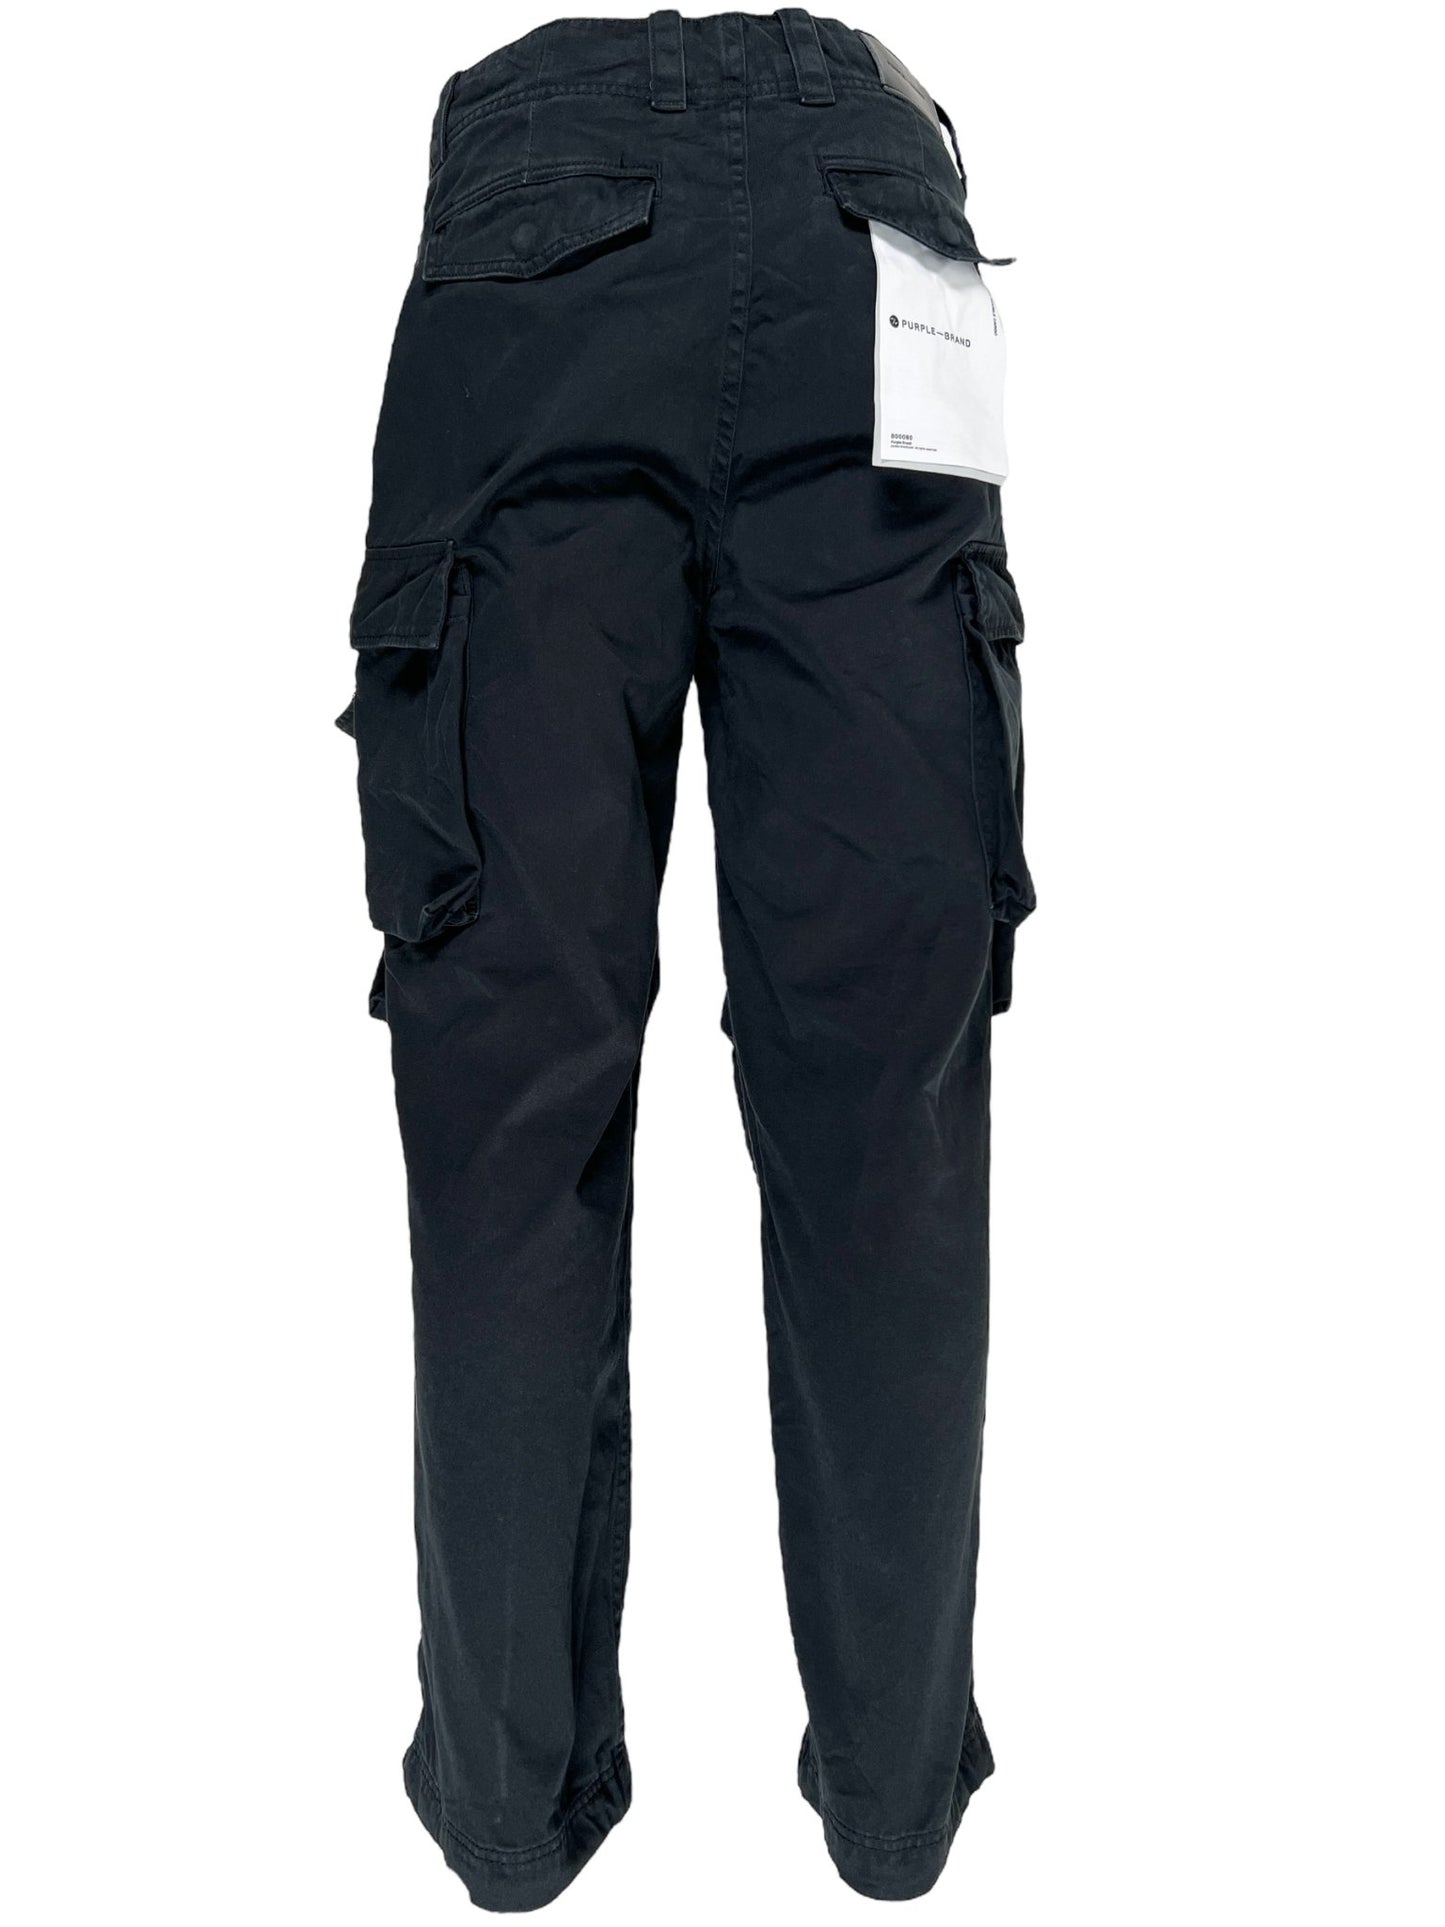 A pair of PURPLE BRAND cargo pants with additional pockets on a white background.